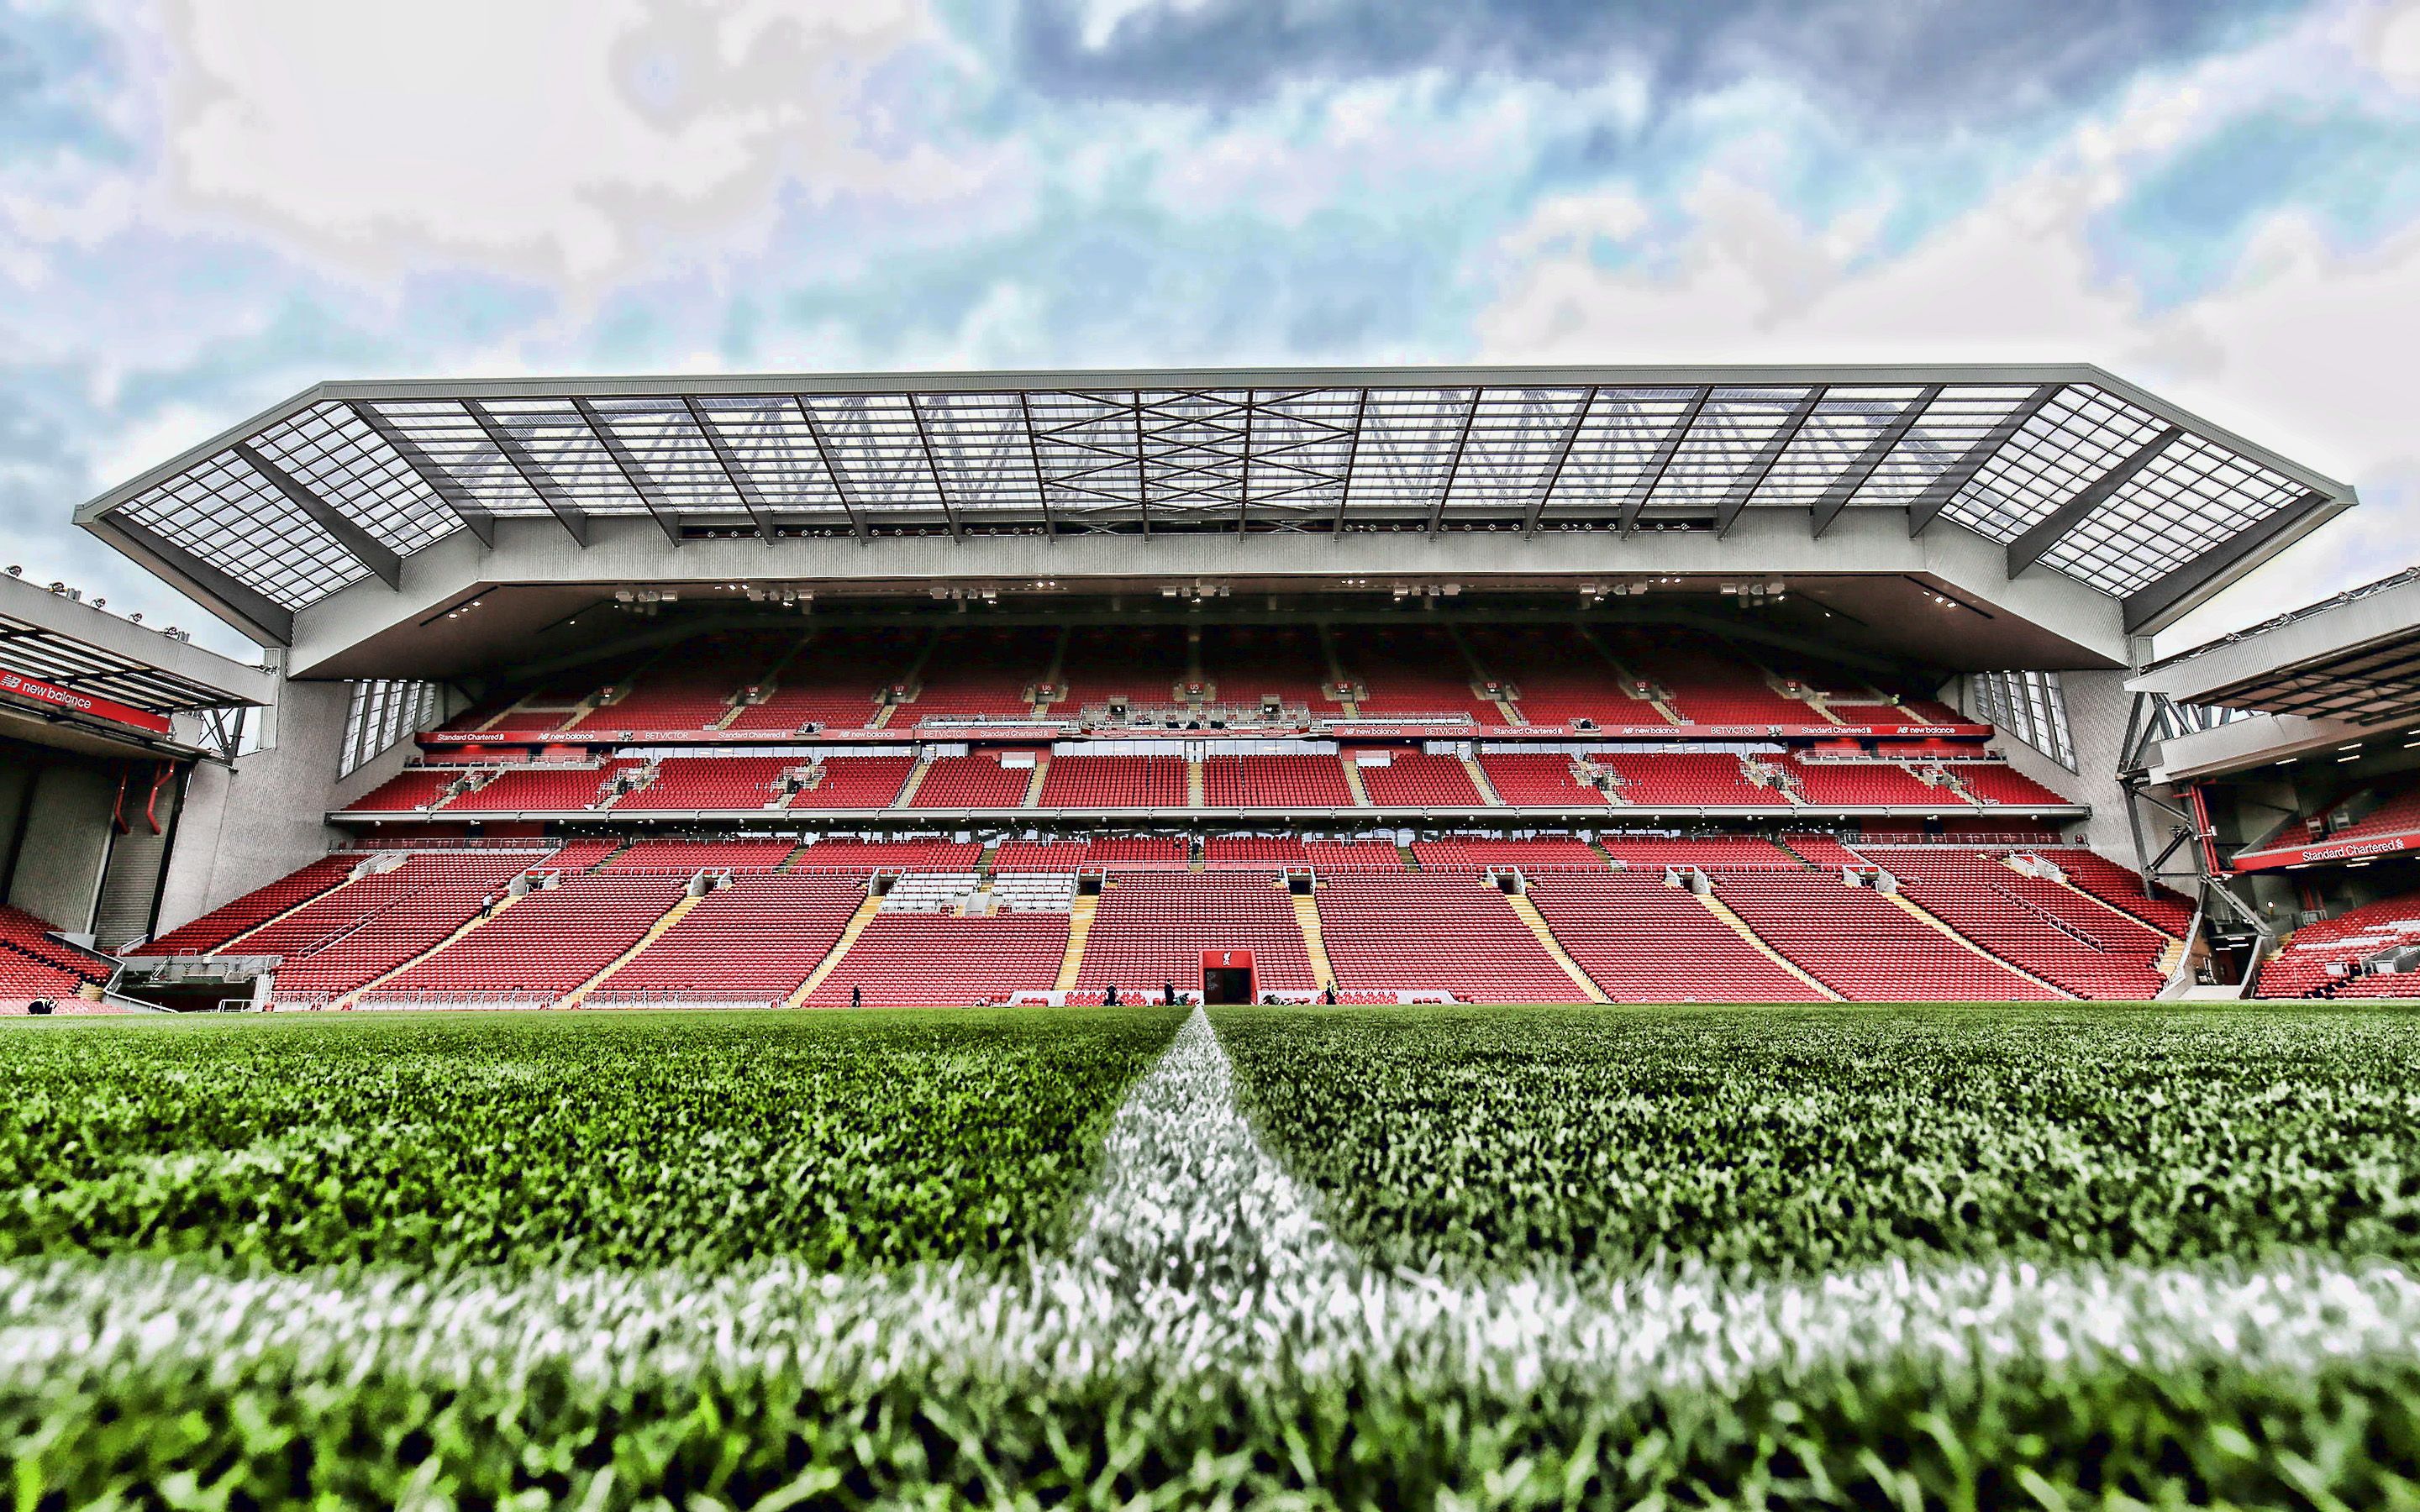 Download wallpaper Liverpool stadium, Anfield, empty stadium, England, HDR, soccer, Liverpool, football stadiums, Anfield Road, Liverpool FC for desktop with resolution 2880x1800. High Quality HD picture wallpaper